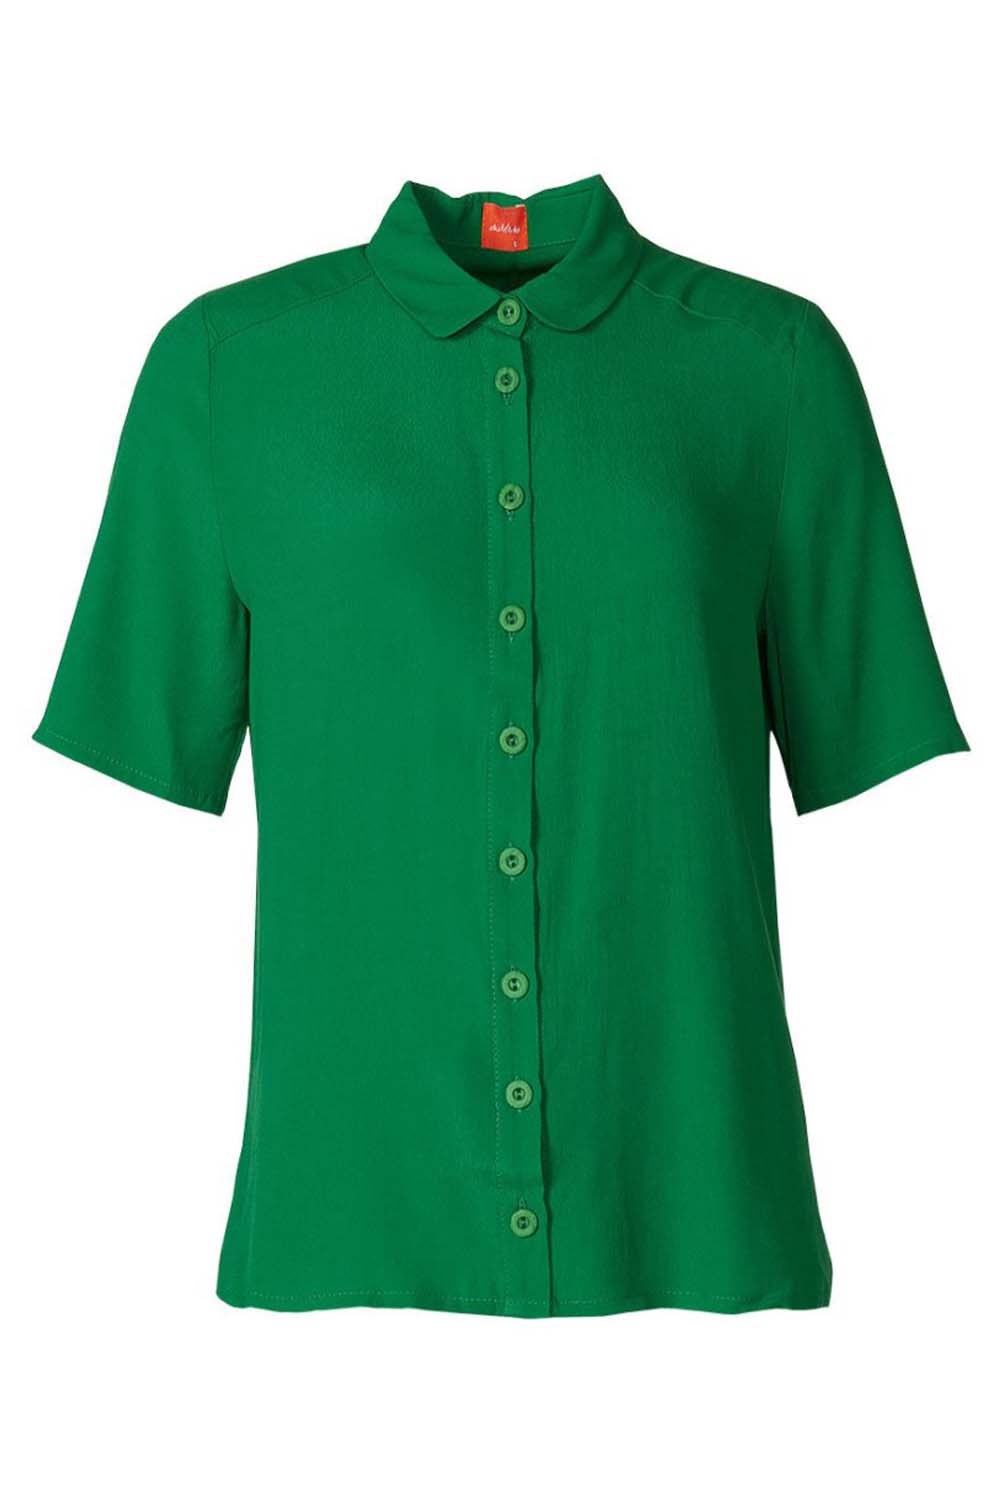 duHannelore top Basic green